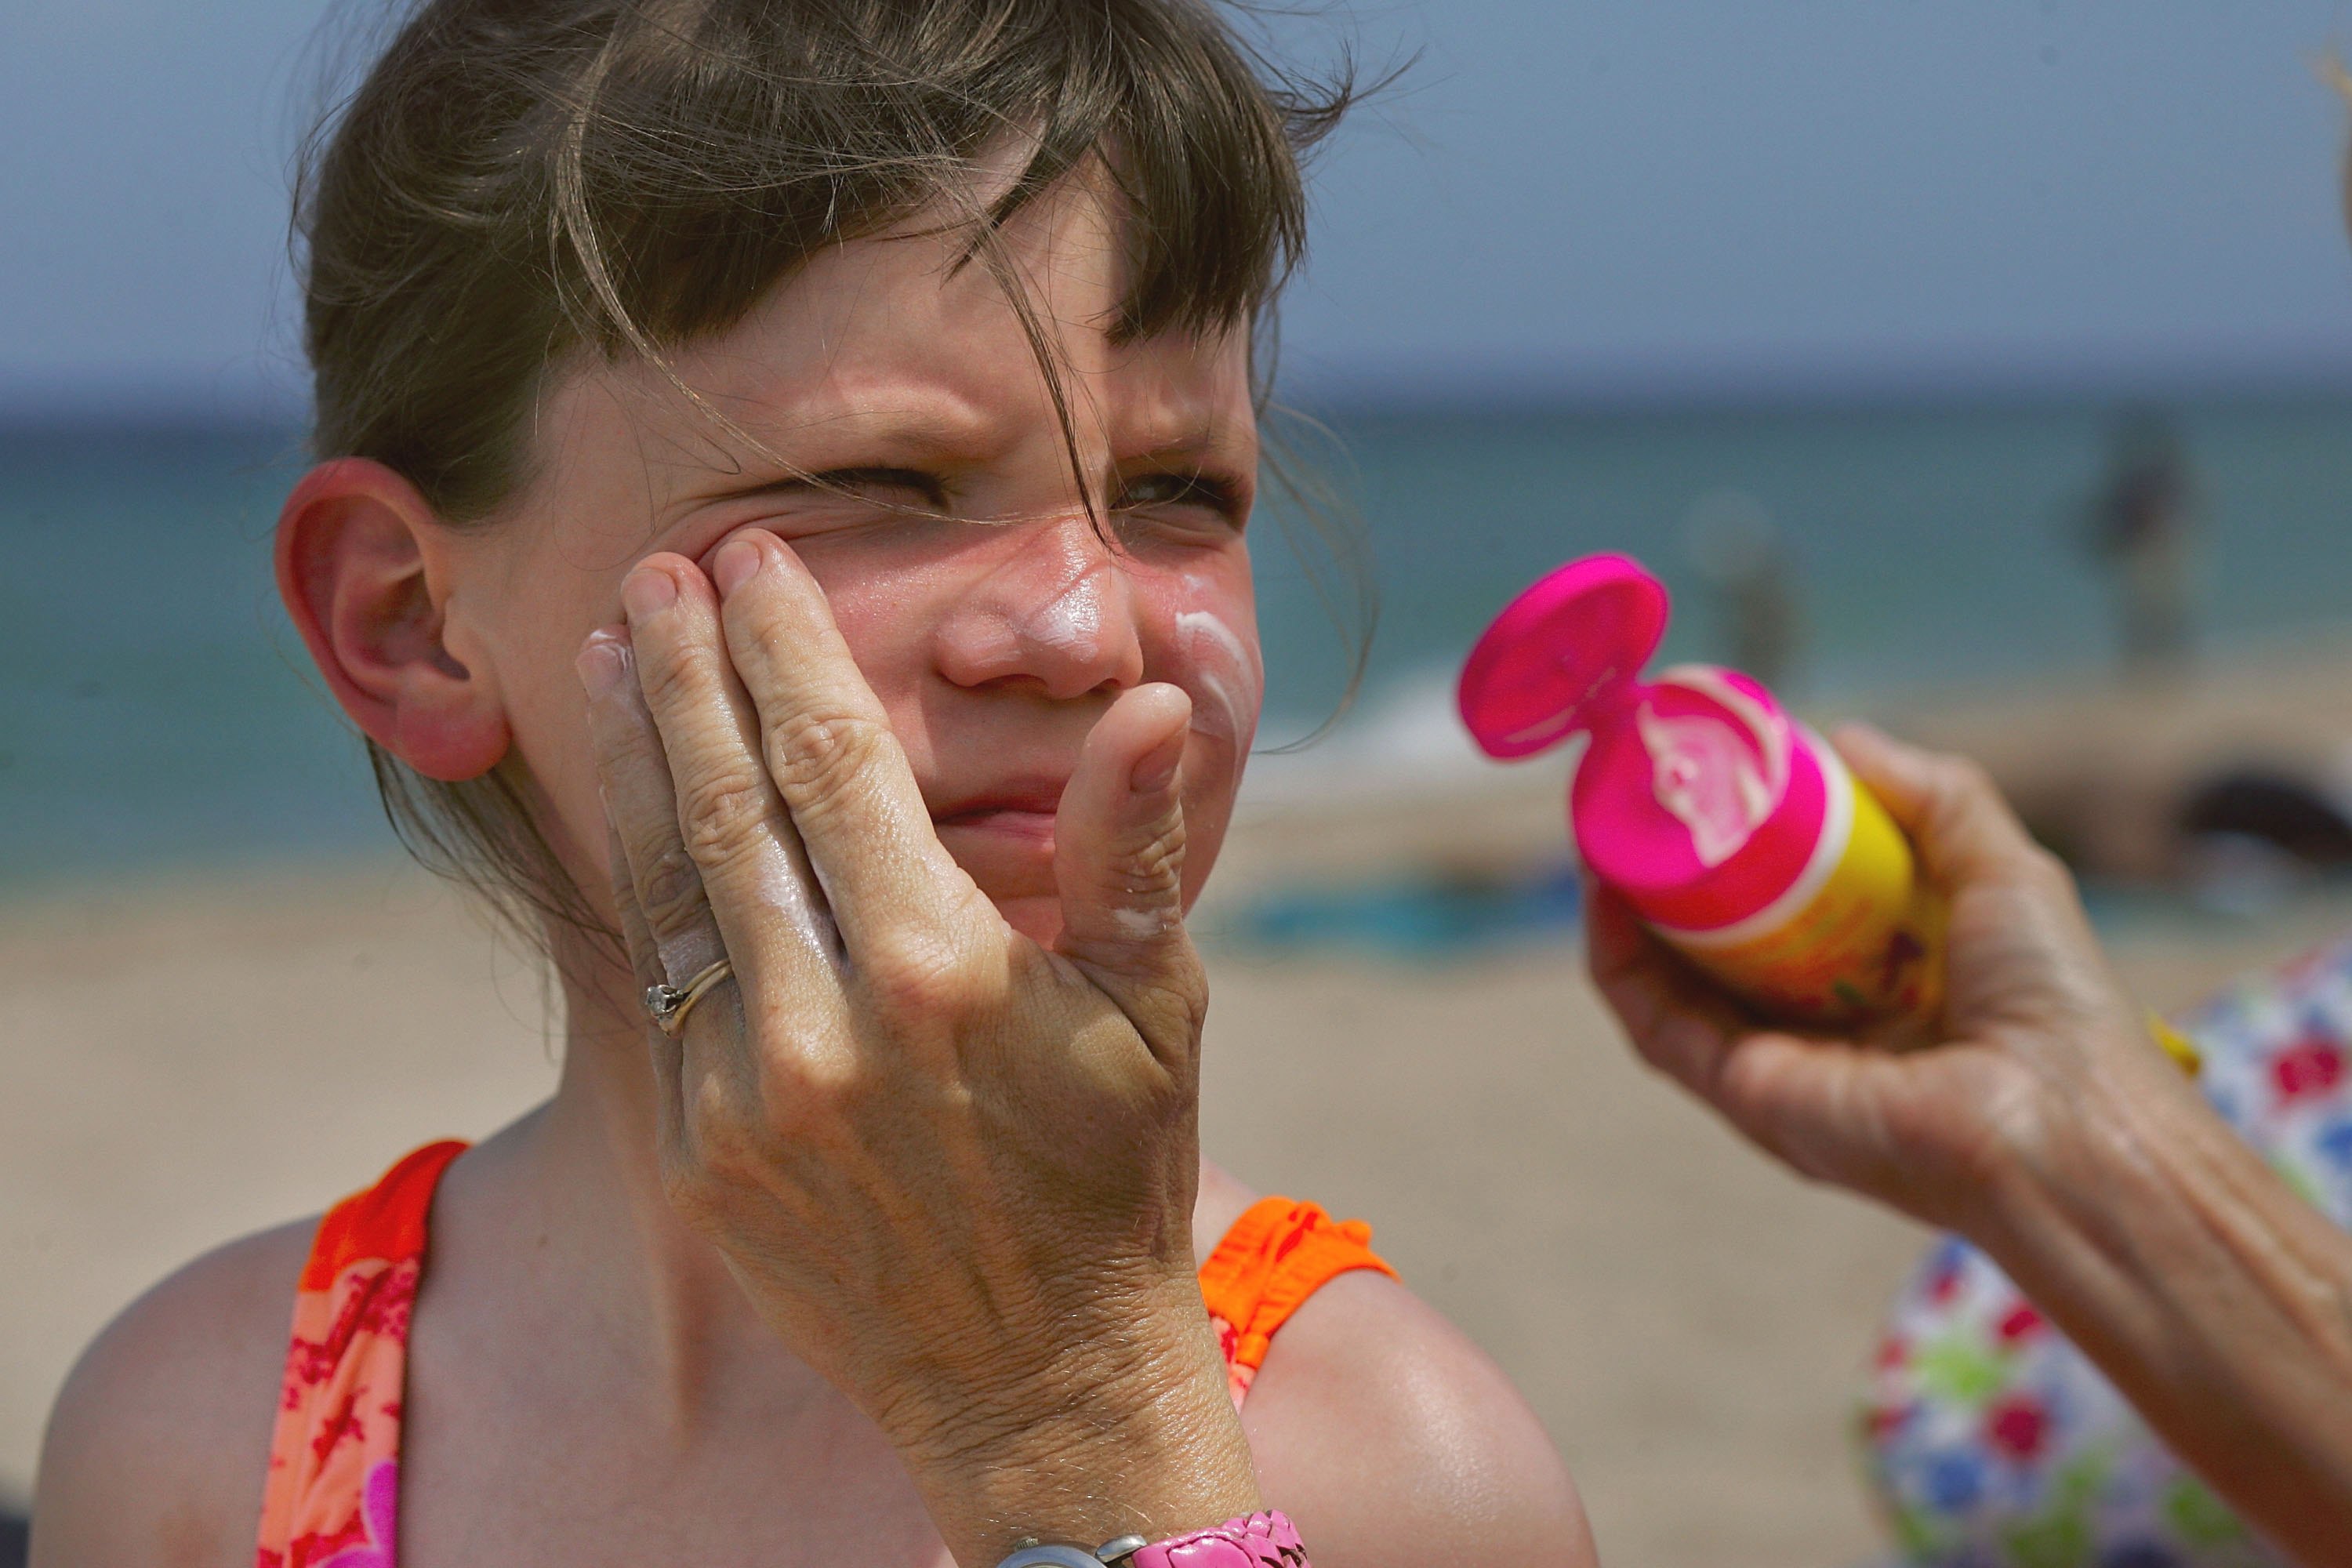 A woman puts sunscreen on a child&#039;s face.